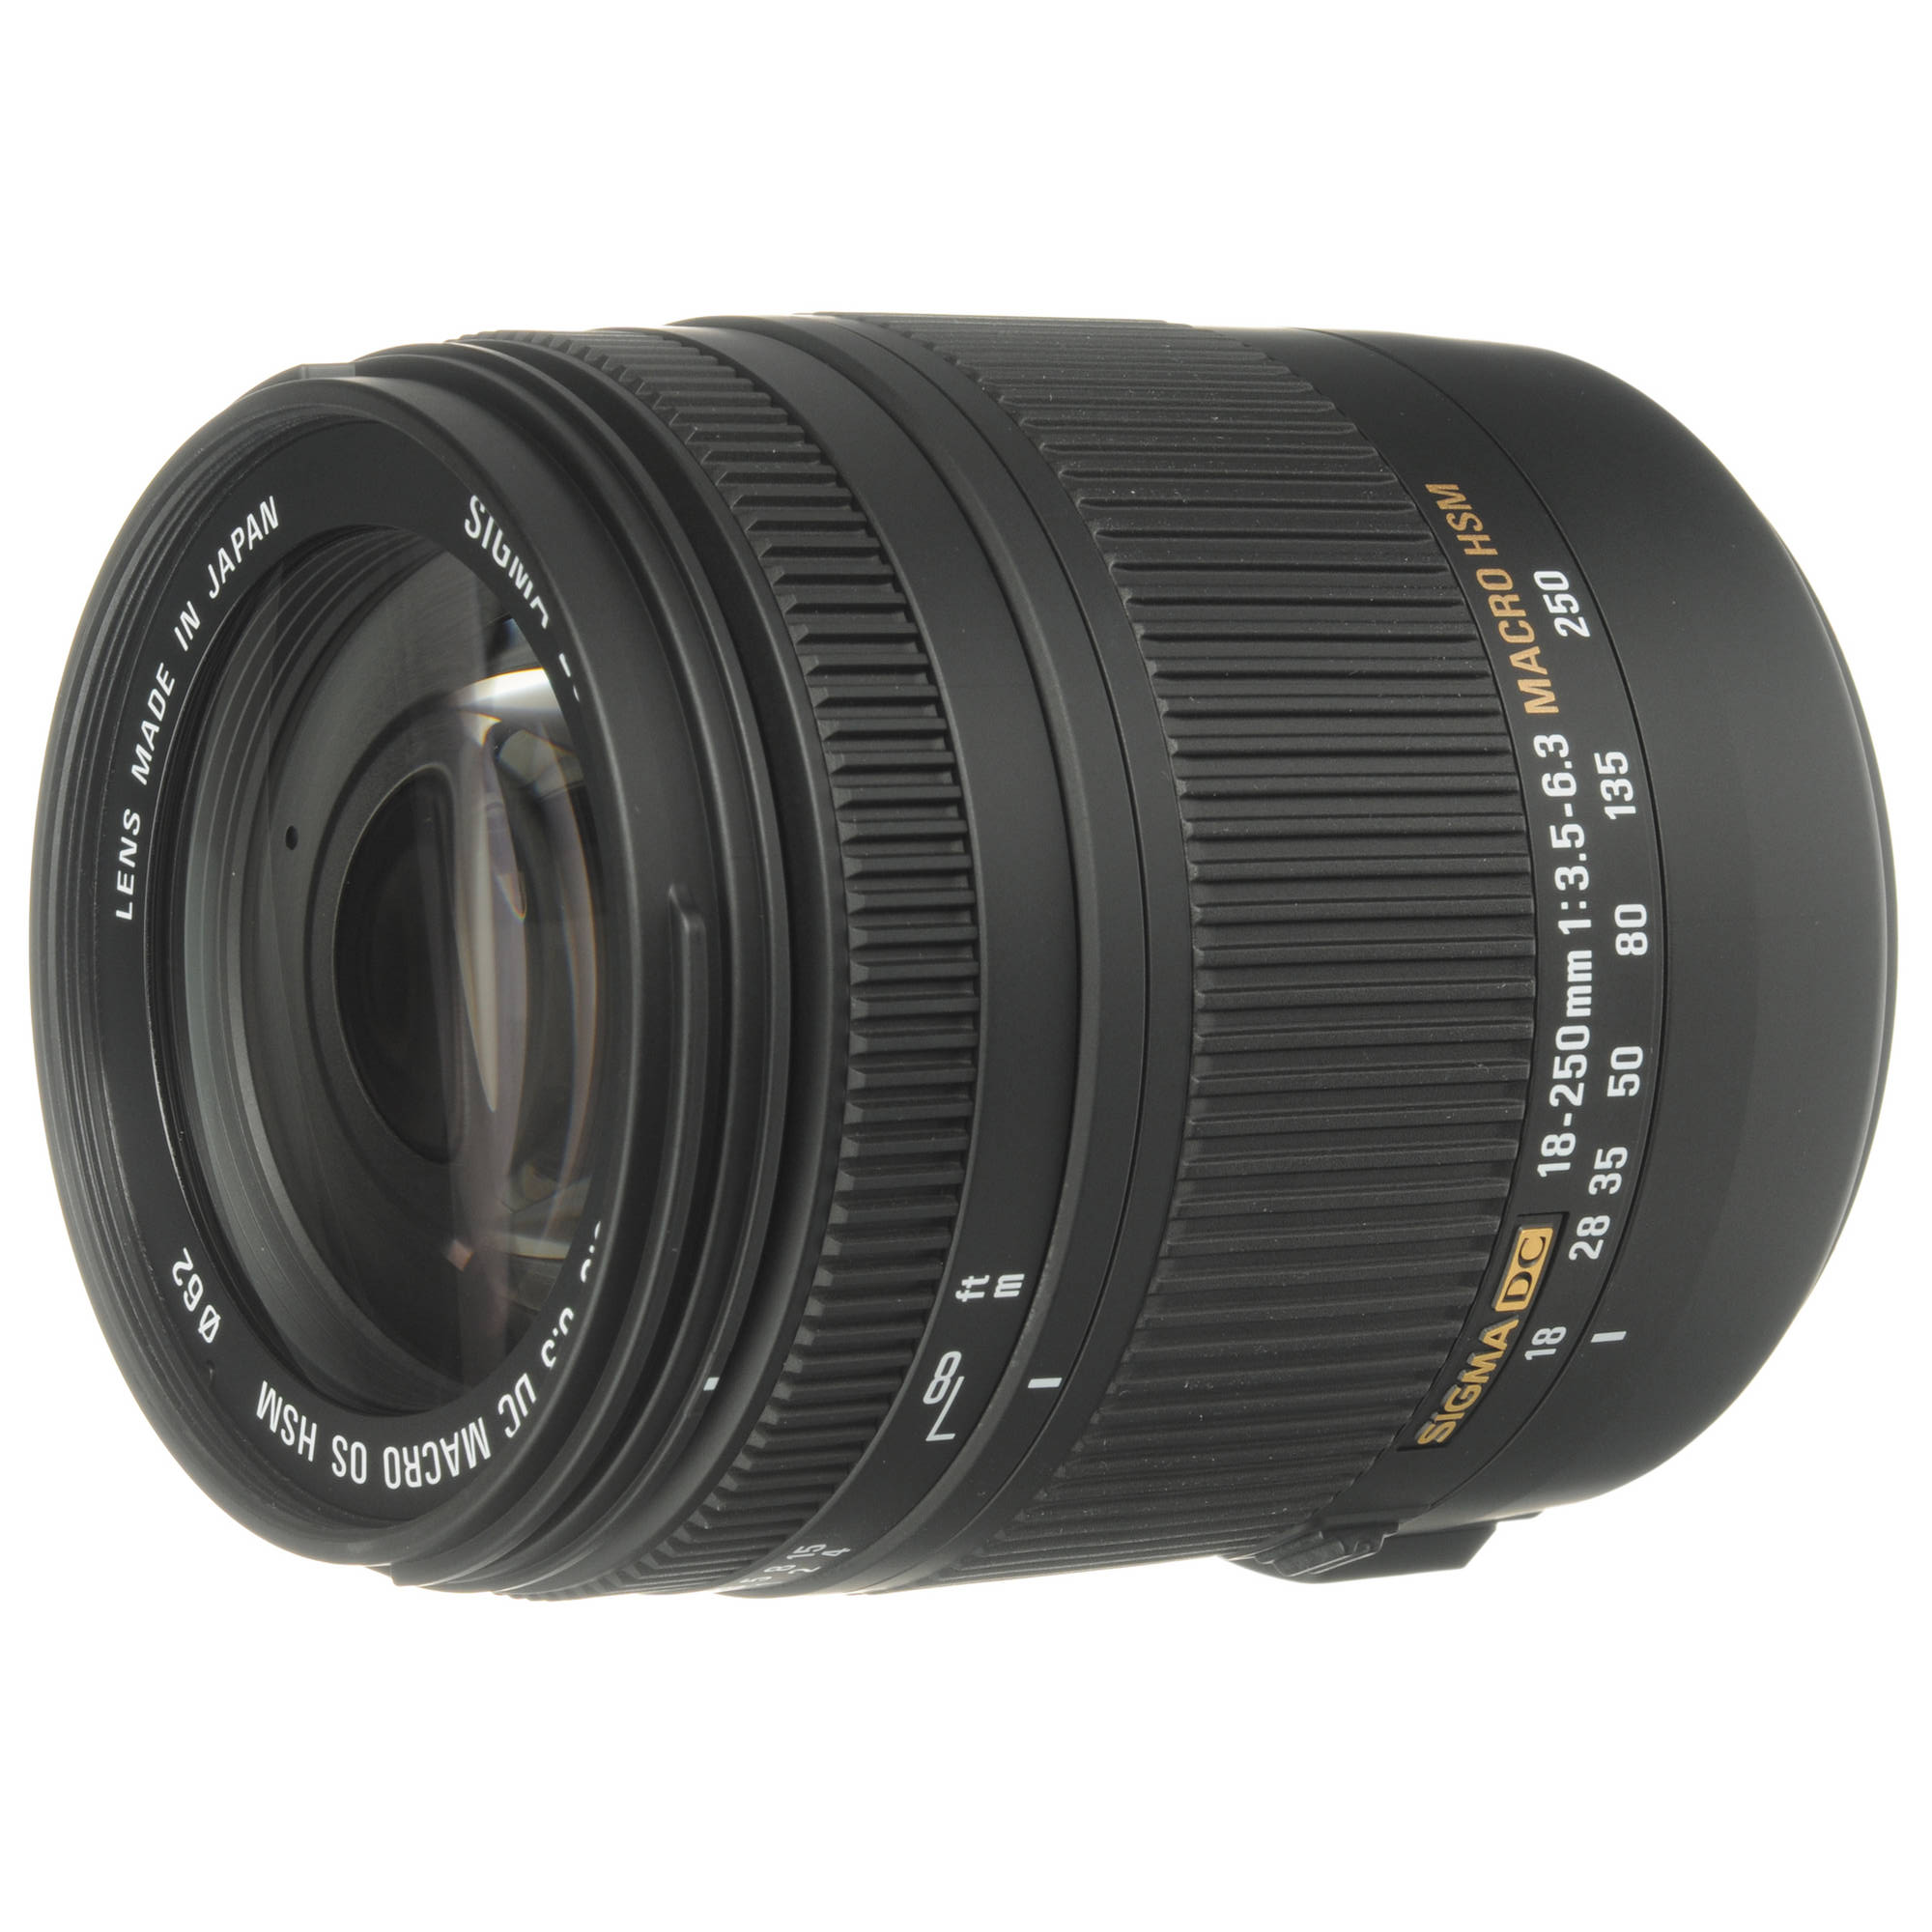 Super Hot – Sigma 18-250mm f/3.5-6.3 DC Macro OS HSM Lens for $189 at Amazon !